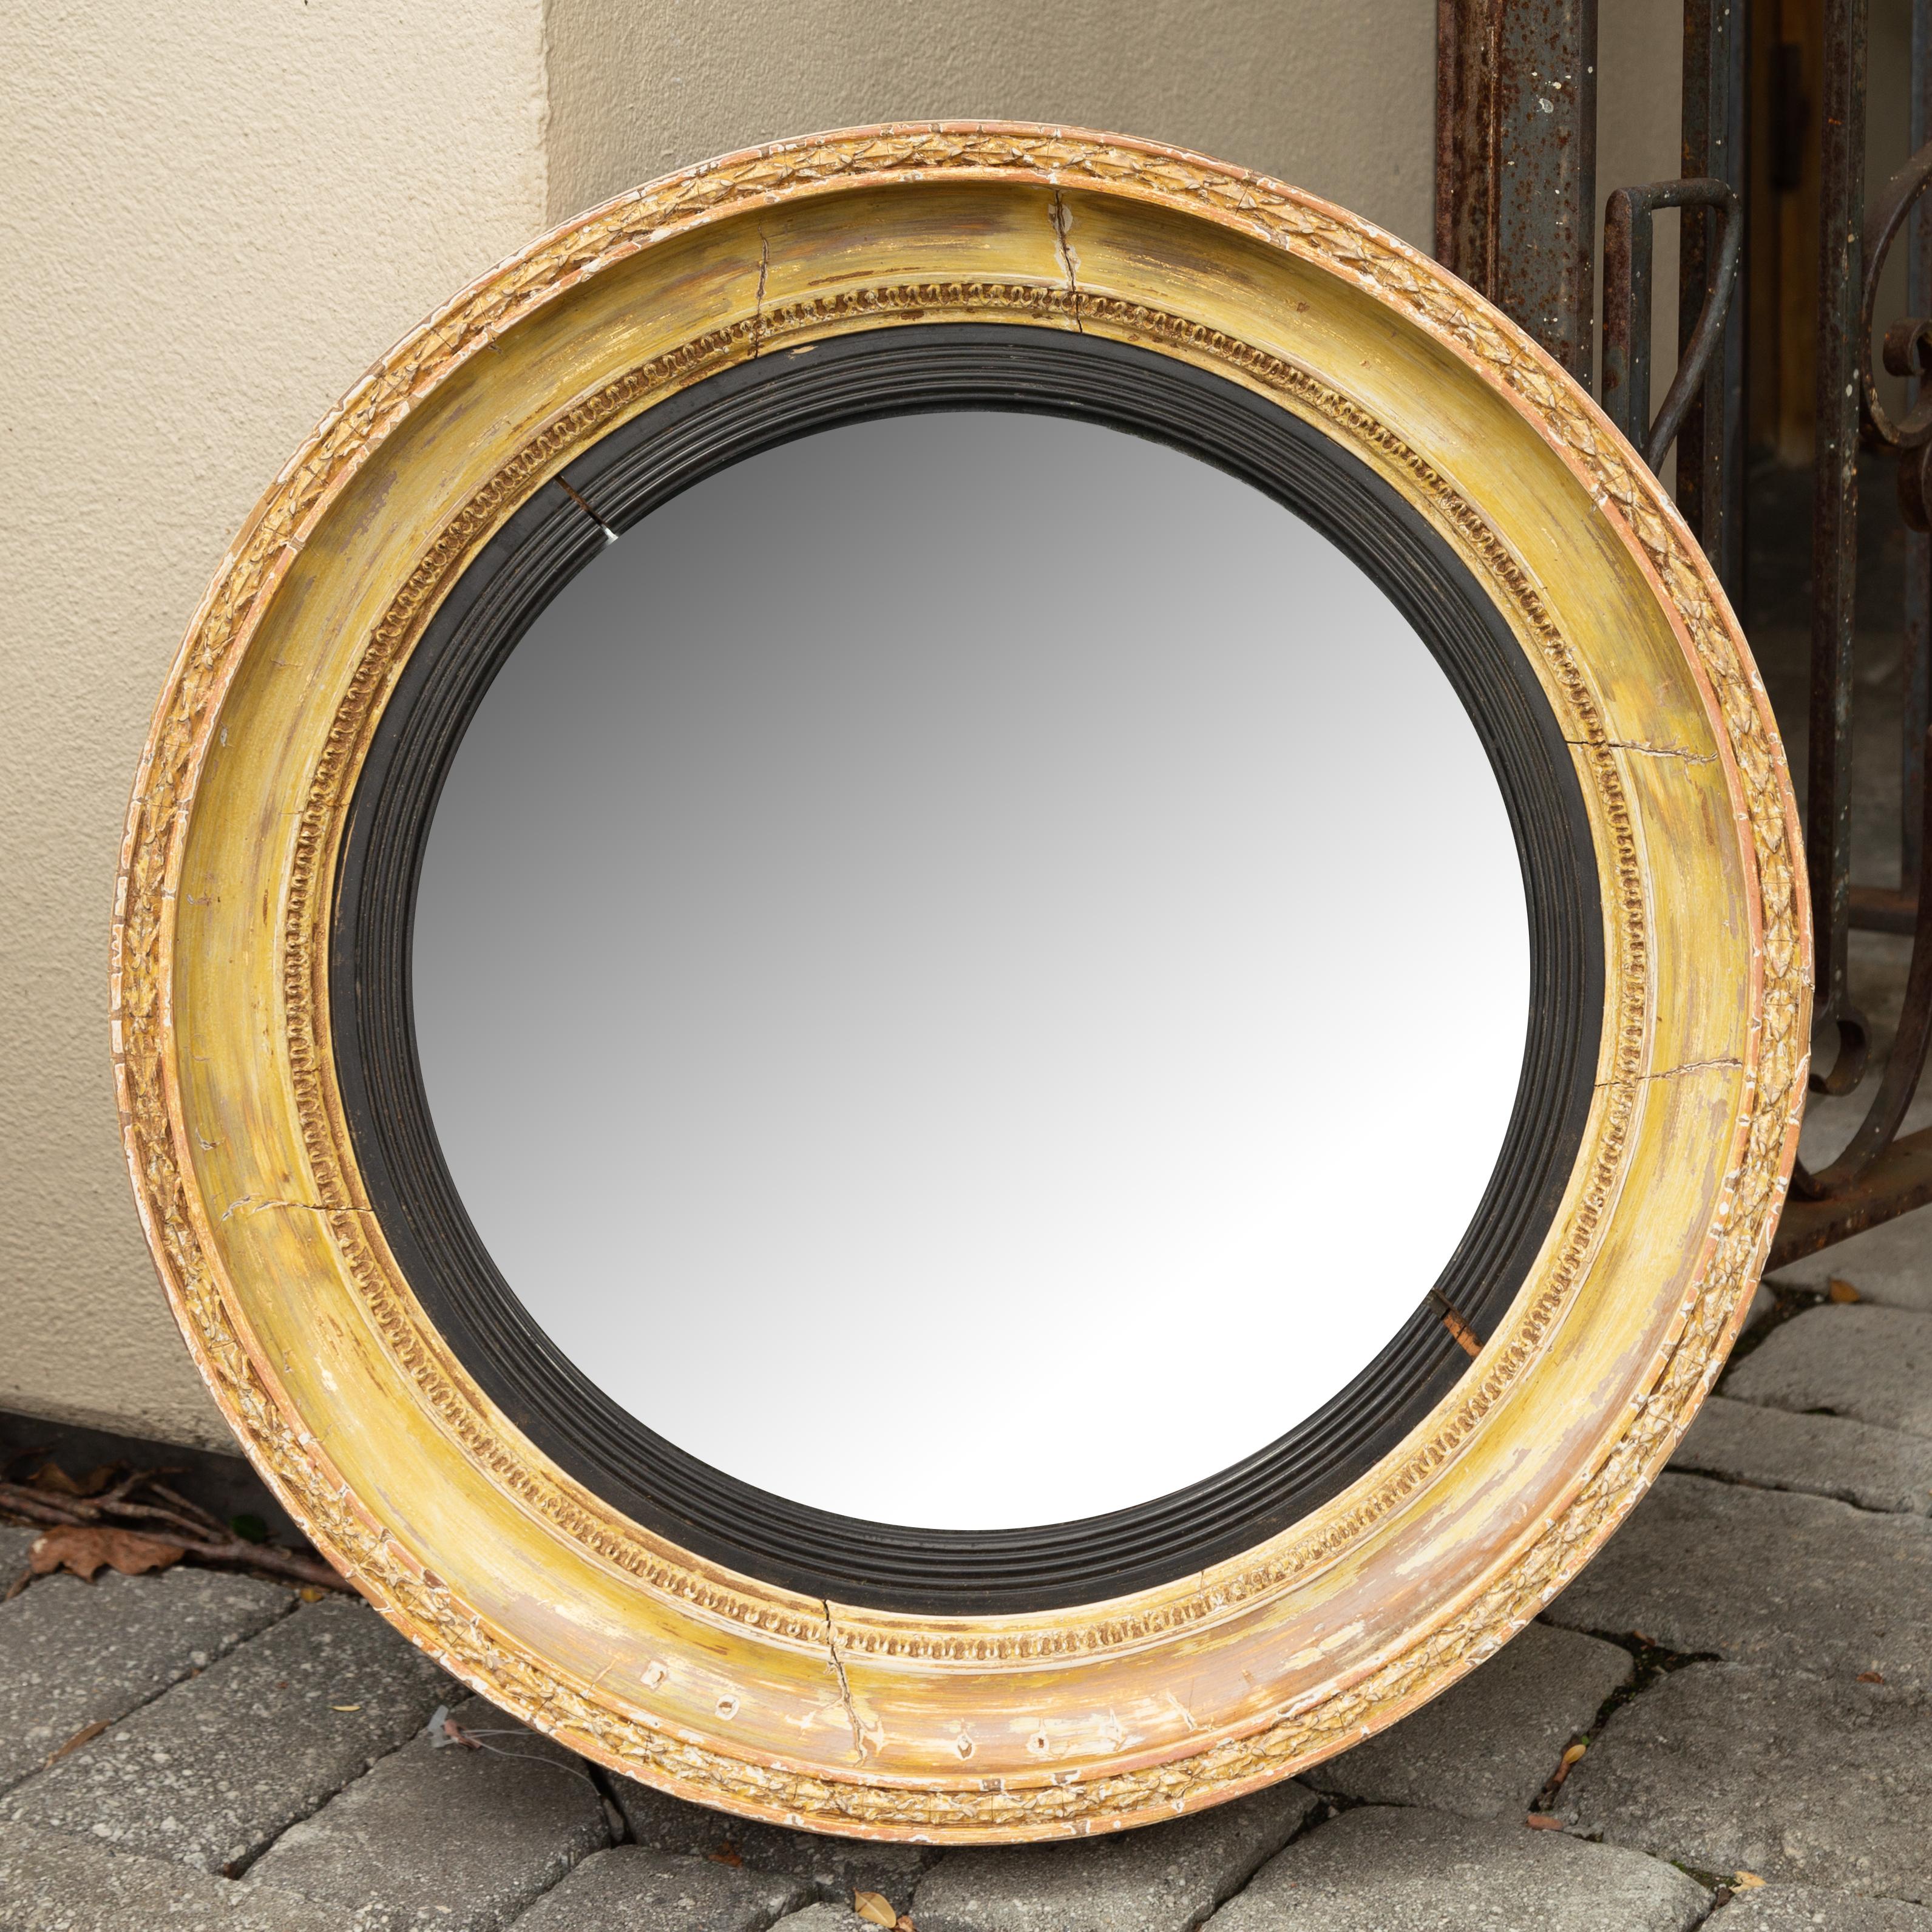 An English painted bullseye convex mirror from the late 19th century with ebonized reeded accents, distressed finish and foliage motifs. Born in England during the third quarter of the 19th century, this handsome piece features a convex mirror